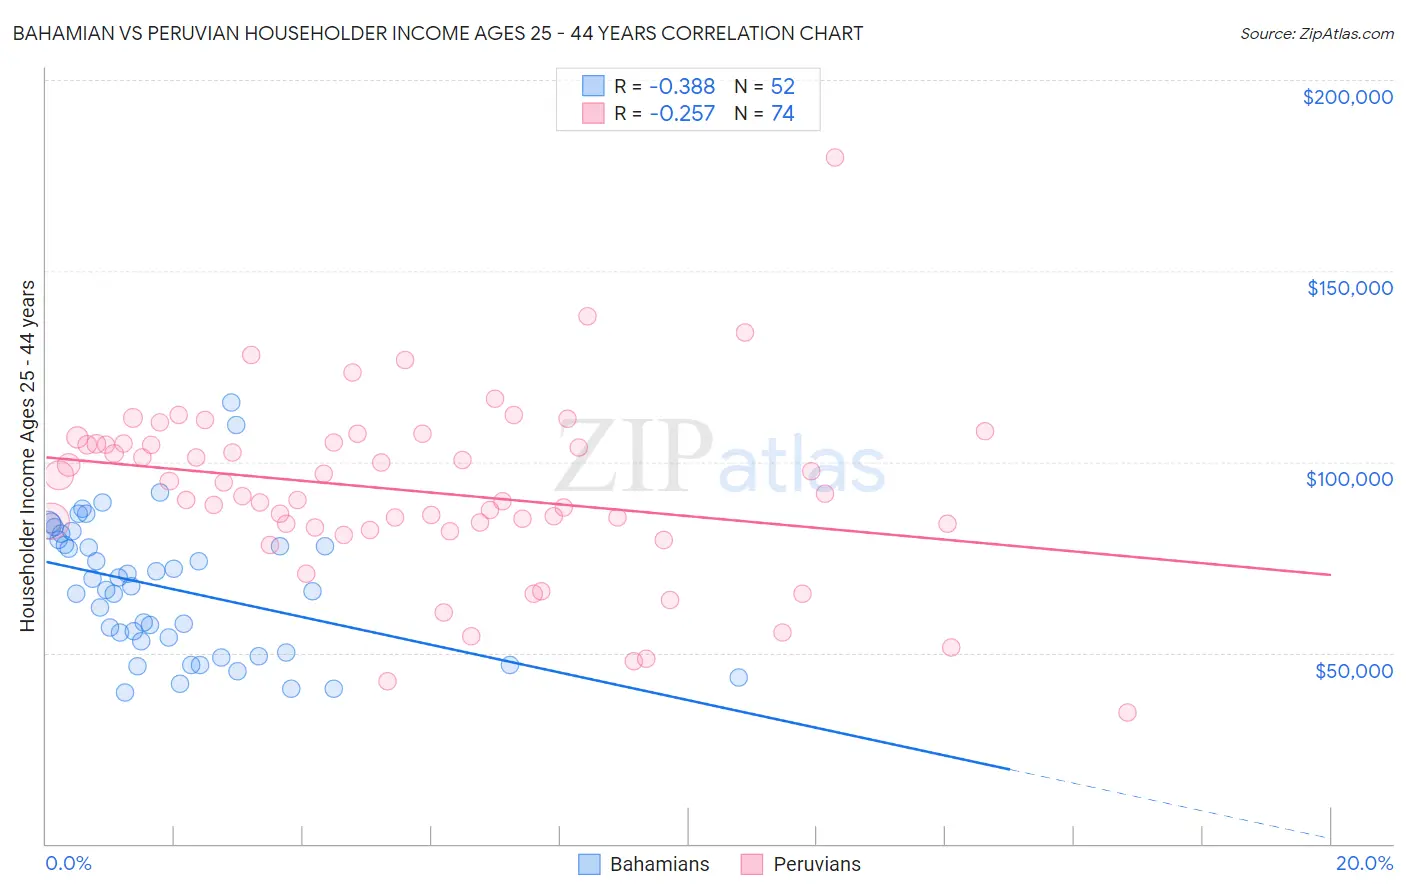 Bahamian vs Peruvian Householder Income Ages 25 - 44 years